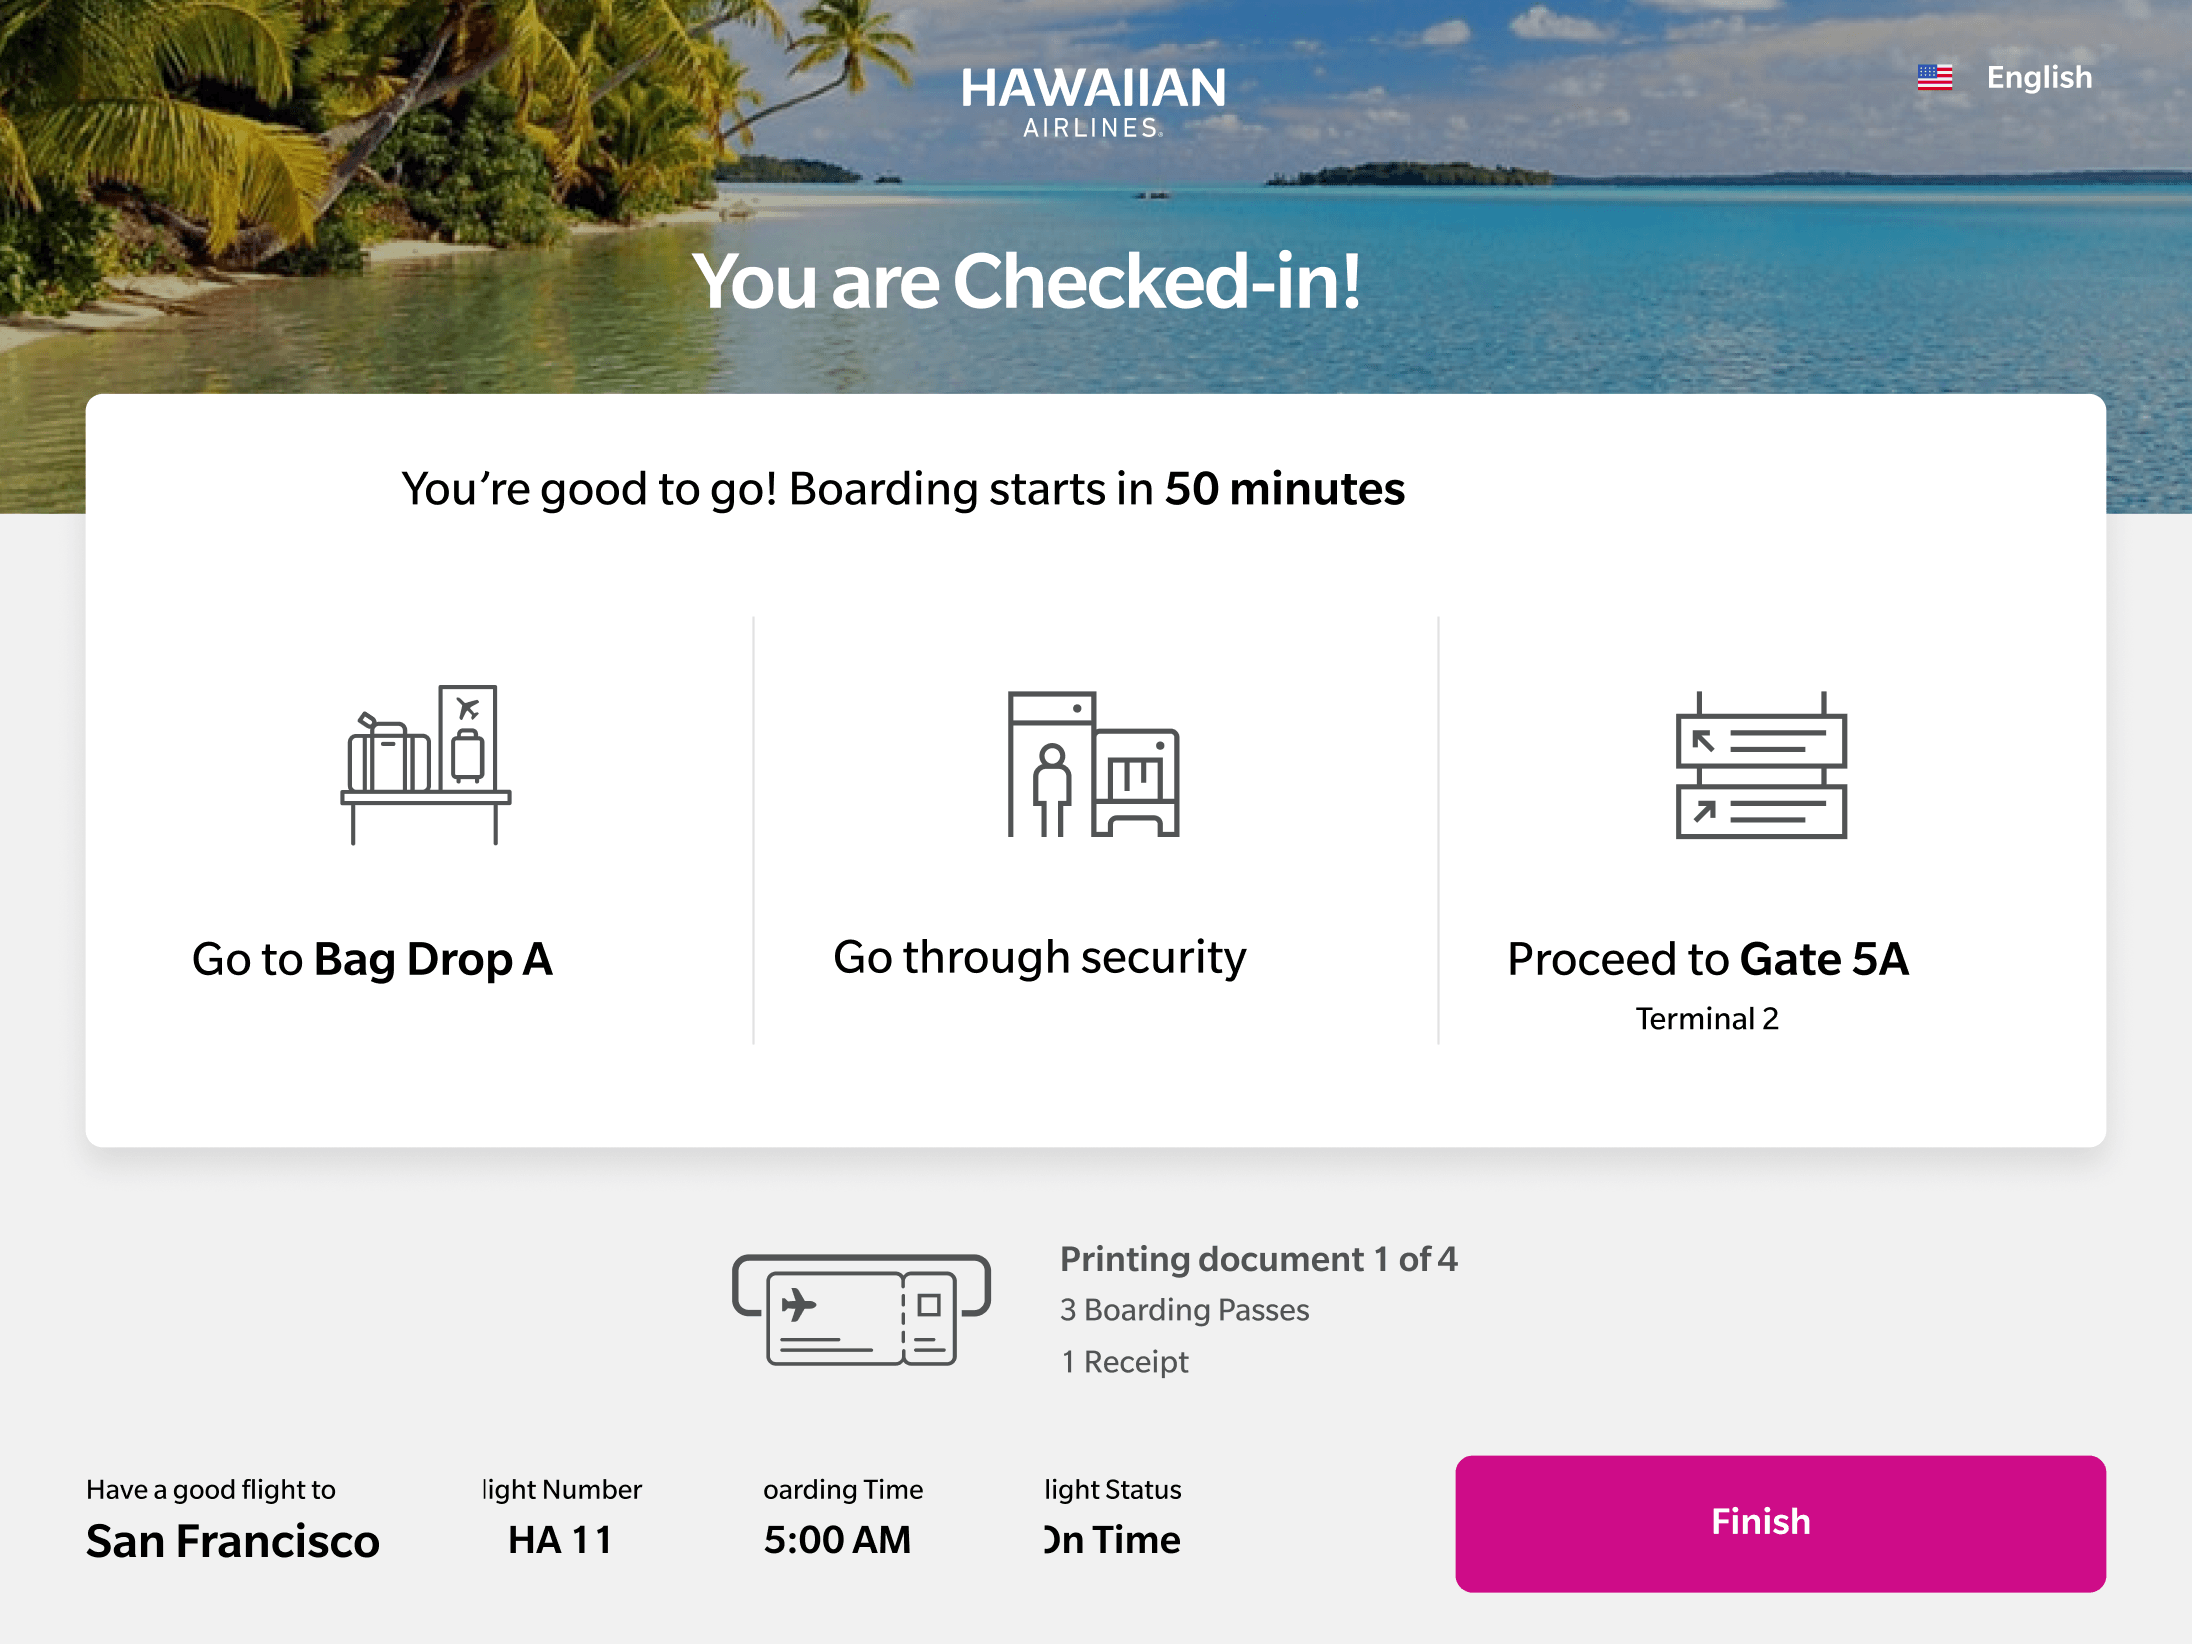 Digital boarding pass for a flight to San Francisco, available on the Hawaiian Airlines app, indicating the user is checked in. Instructions include going to bag drop, going through security, and proceeding to Gate 5A. Boarding starts in 50 minutes.